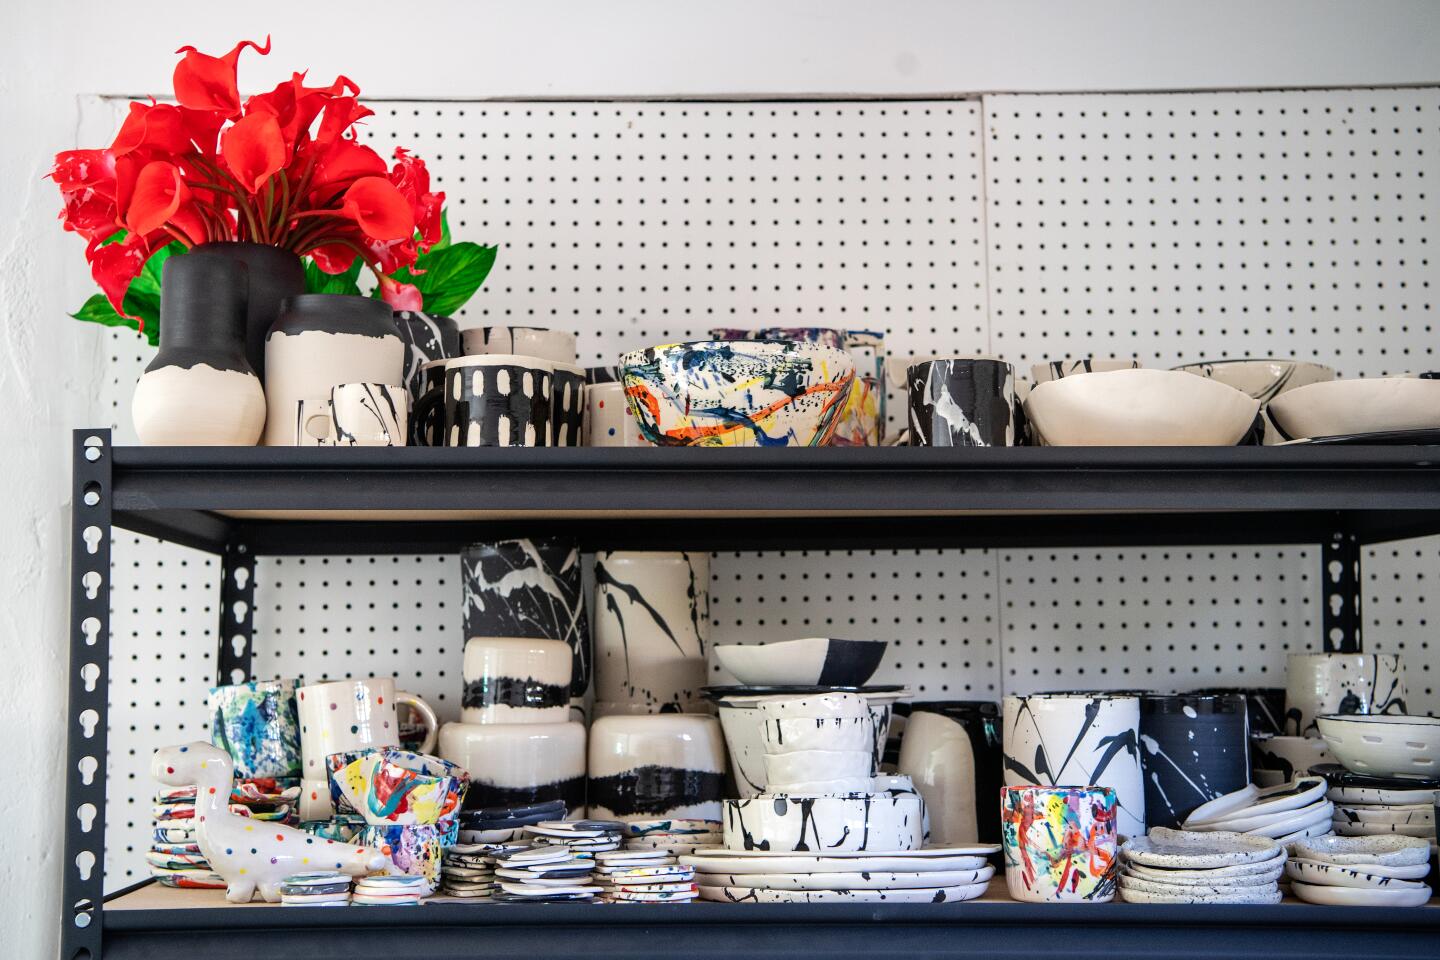 A look at two shelves full of ceramics inside the BTW studio